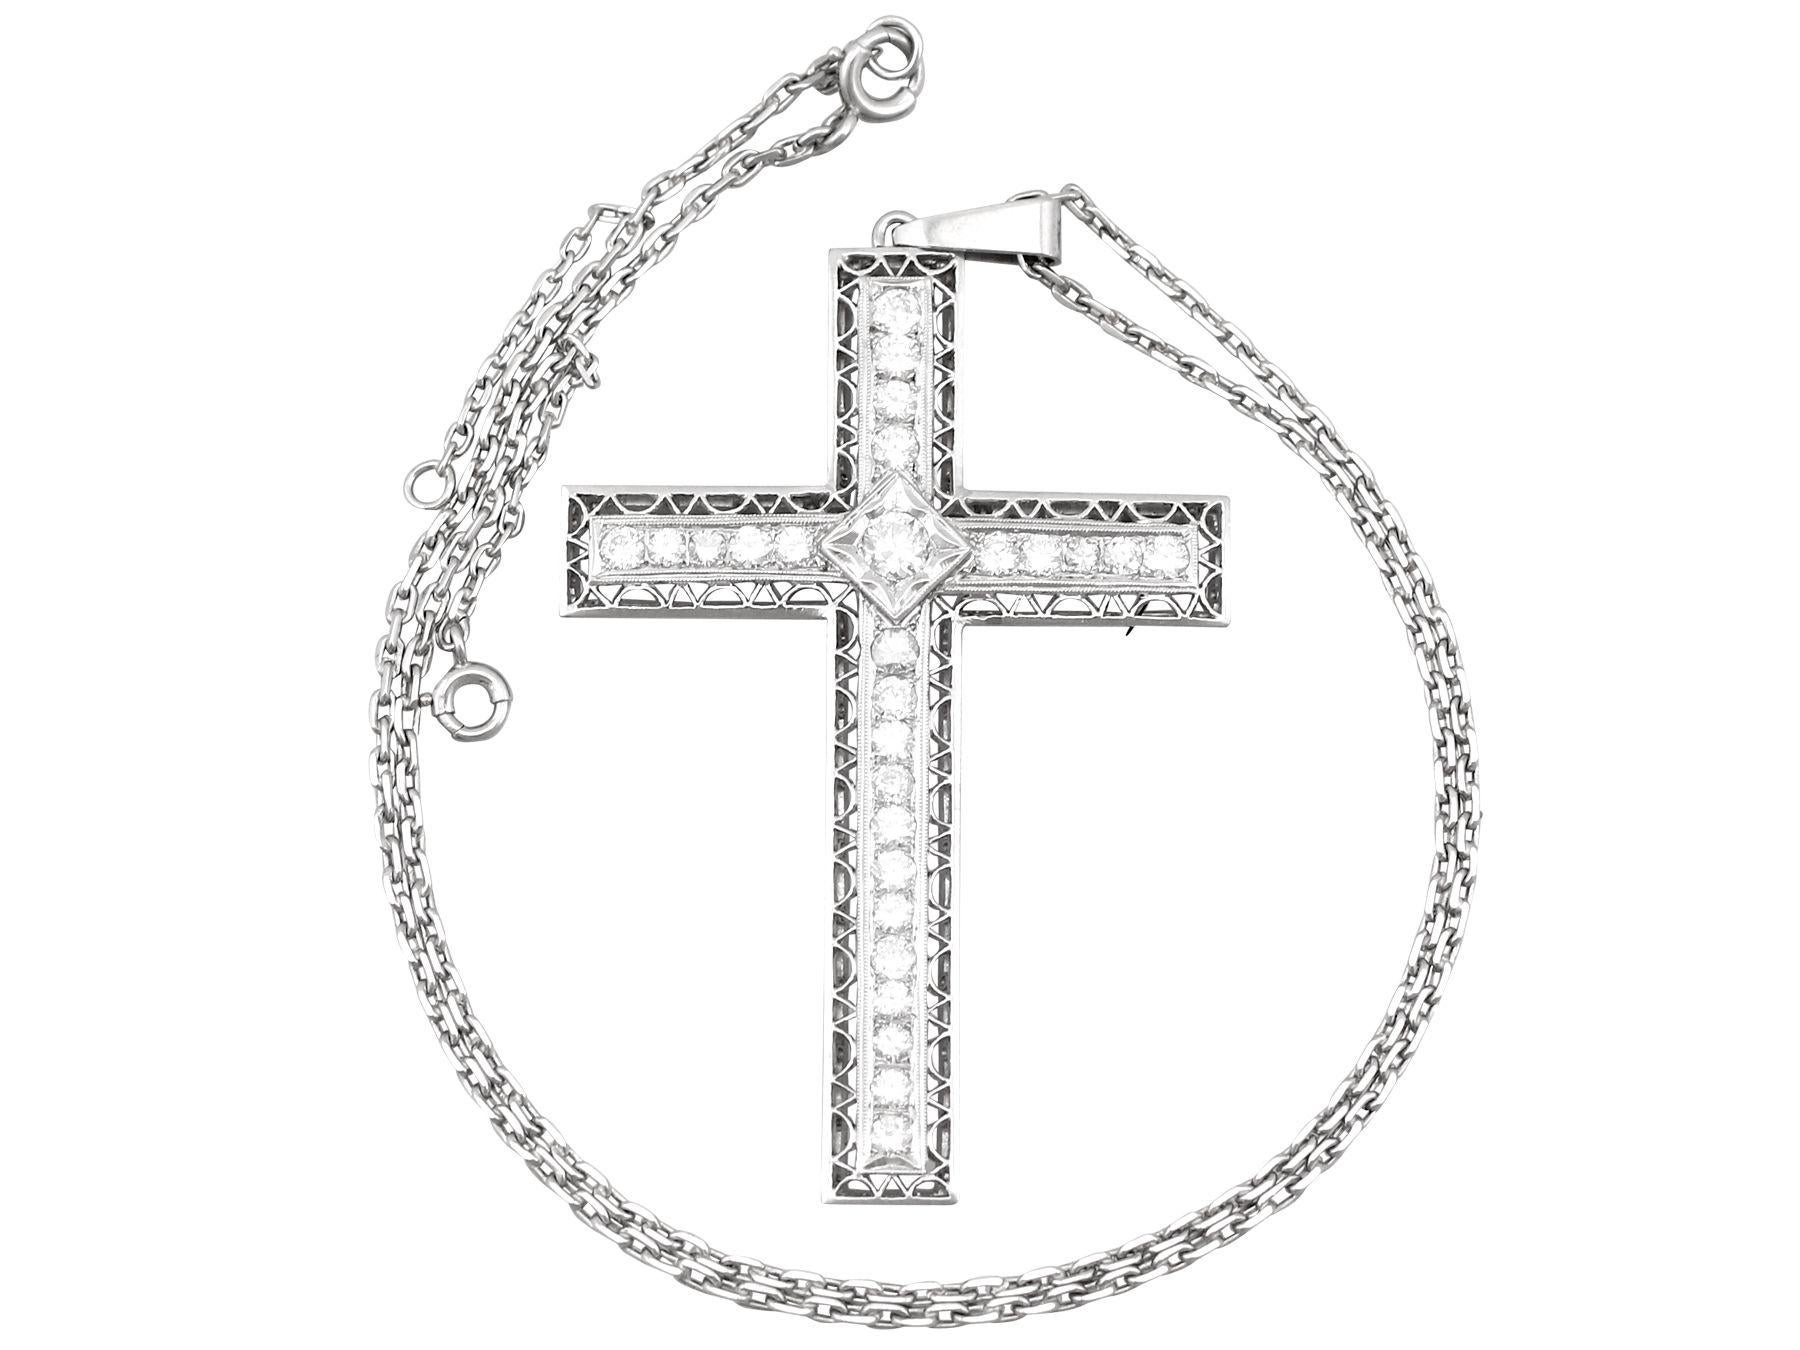 A stunning antique 1920s 2.07 carat diamond and platinum cross design pendant and chain; part of our diverse antique jewelry and estate jewelry collections.

This stunning, fine and impressive antique diamond pendant has been crafted in